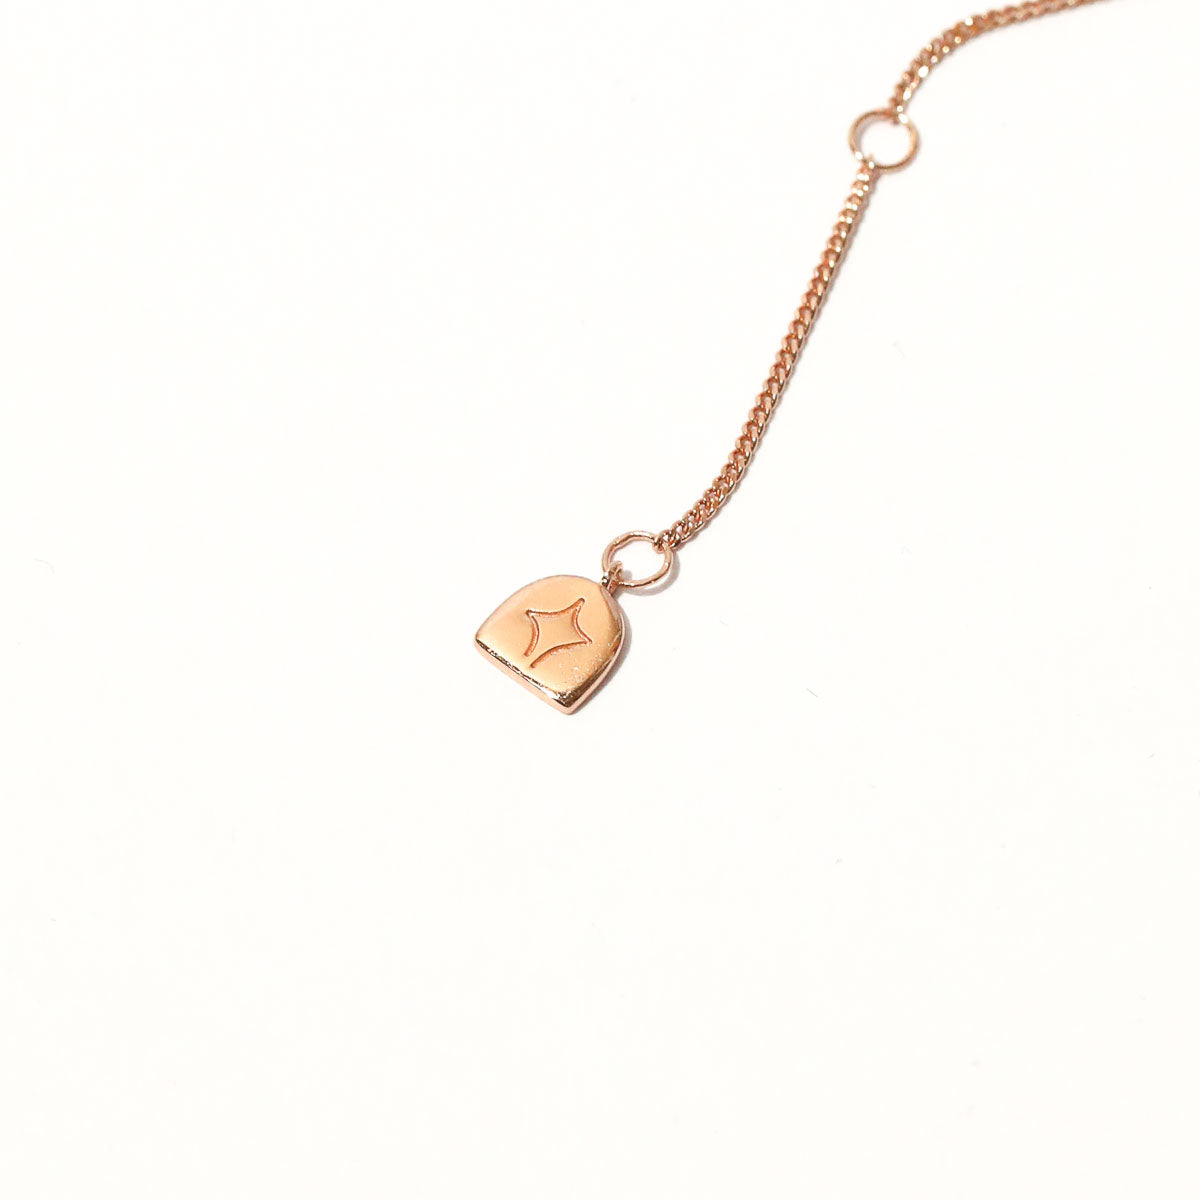 Twilight Star Pendant Necklace in Rose Gold close up